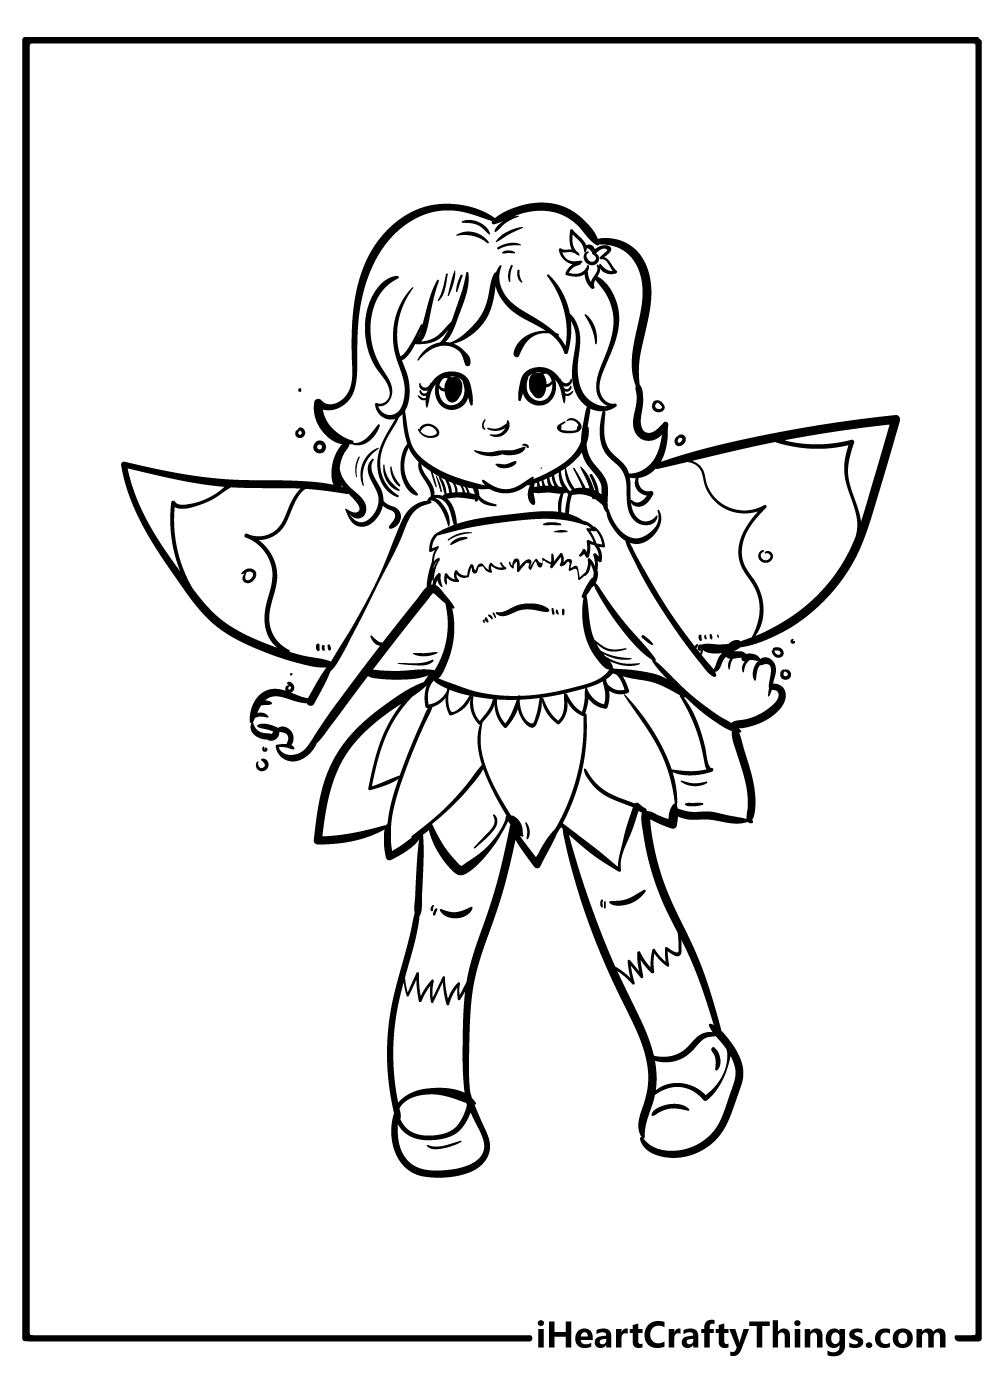 Fairy Coloring Pages free pdf download